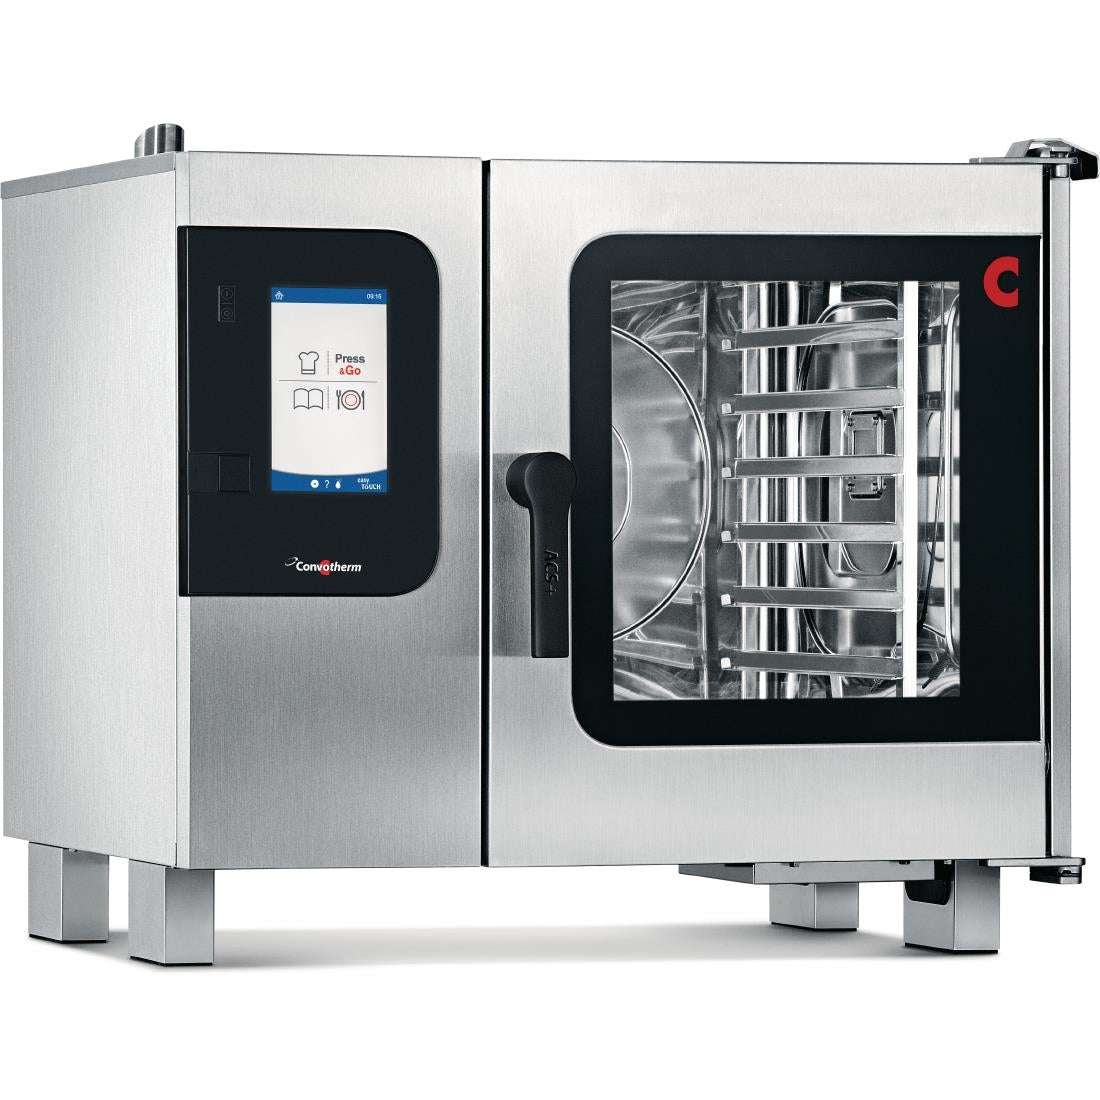 Convotherm 4 easyTouch Combi Oven 6 x 1 x1 GN Grid with Smoker and ConvoGrill and Install